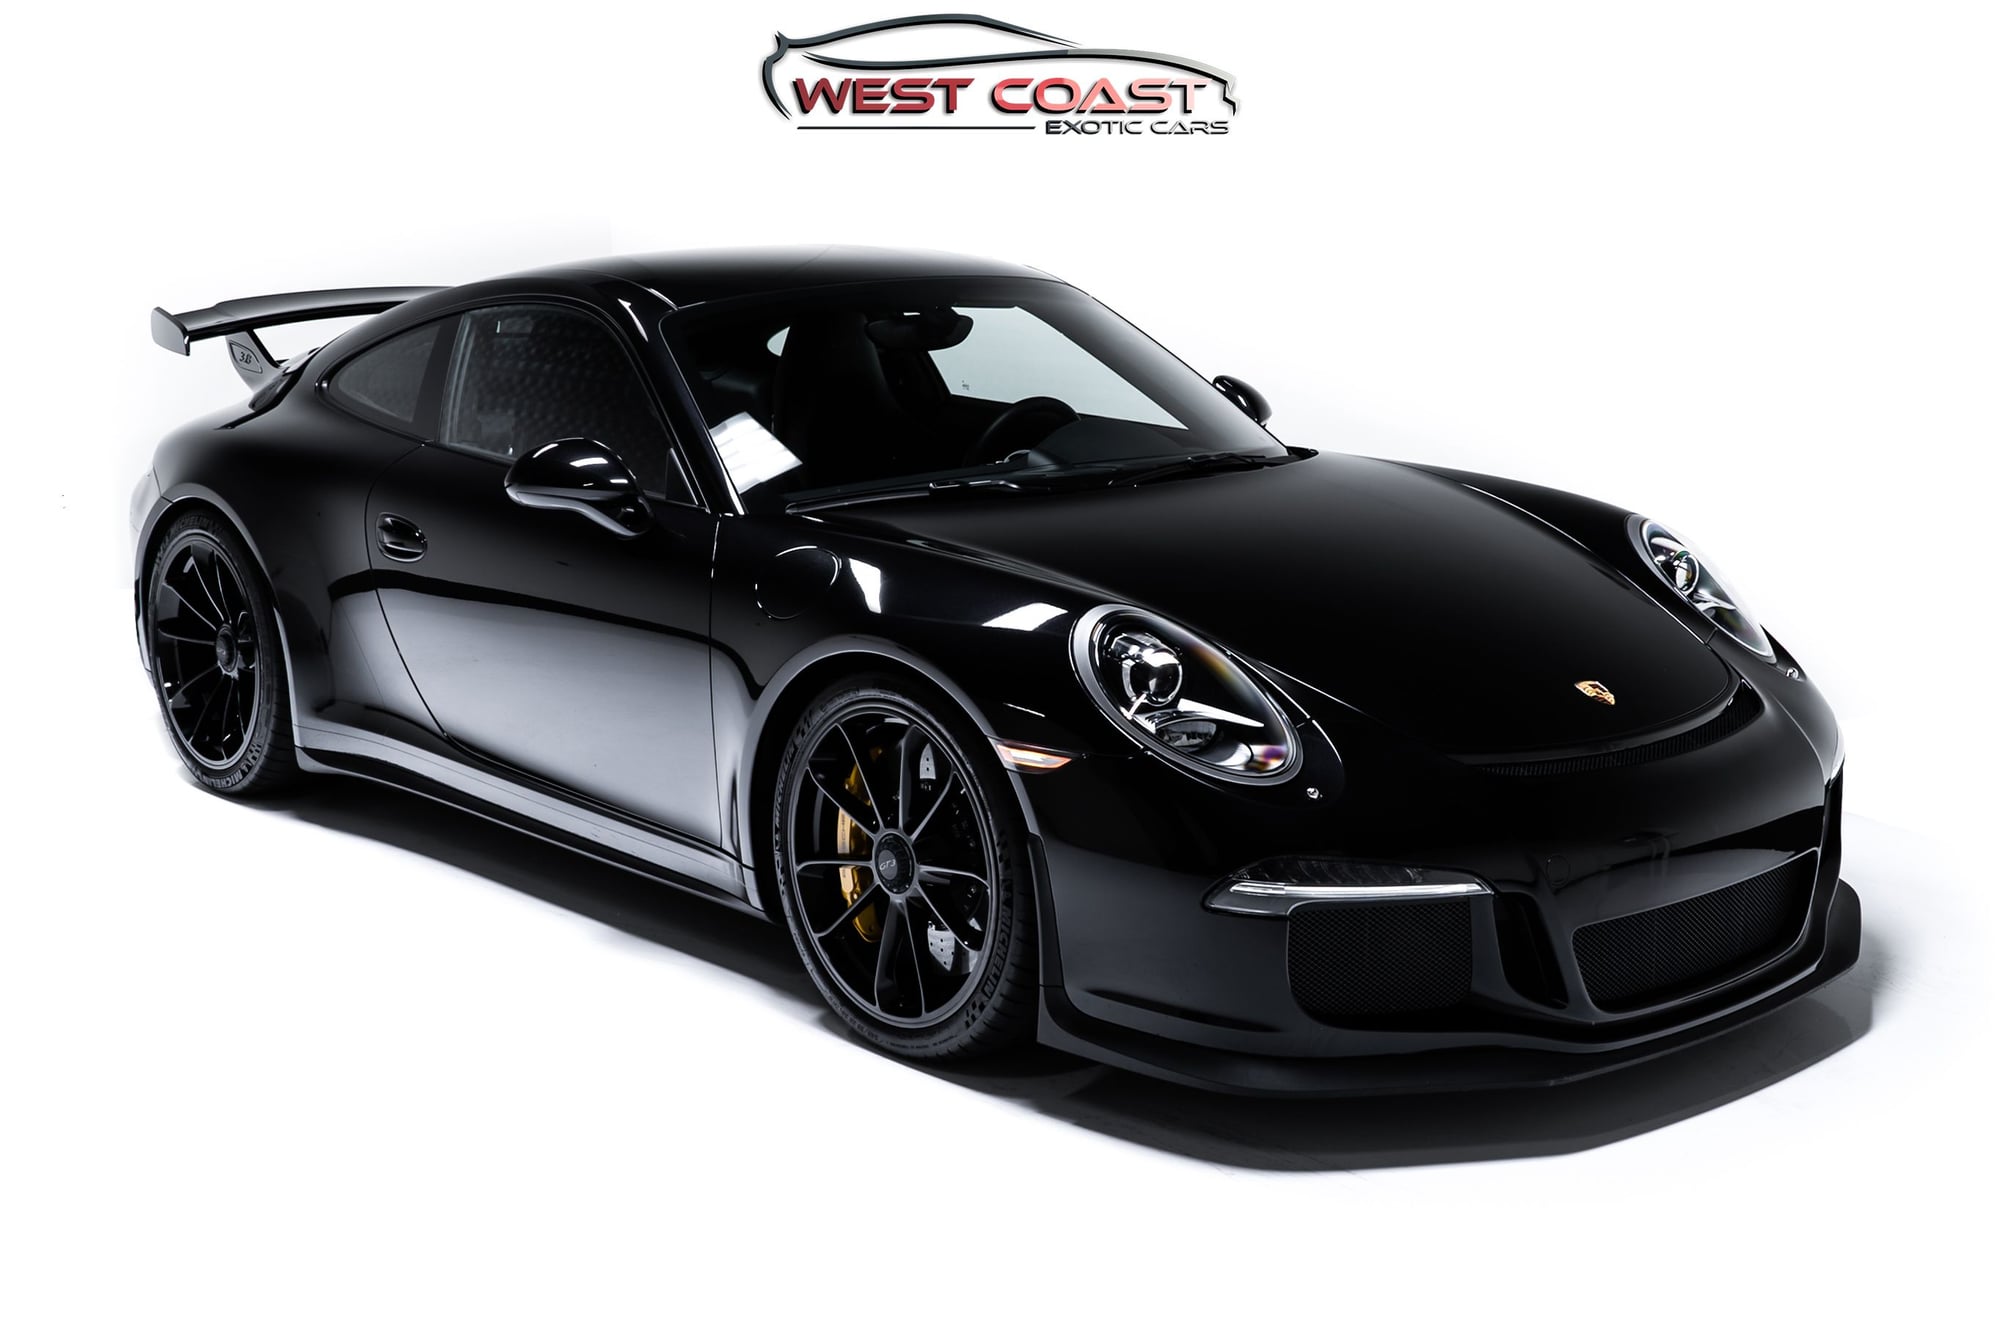 2014 Porsche GT3 - 2014 Porsche 911 GT3 Basalt Black Loaded w/ CCBs! - Used - VIN WP0AC2A91ES183280 - 12,139 Miles - 6 cyl - 2WD - Automatic - Coupe - Black - Murrieta, CA 92562, United States